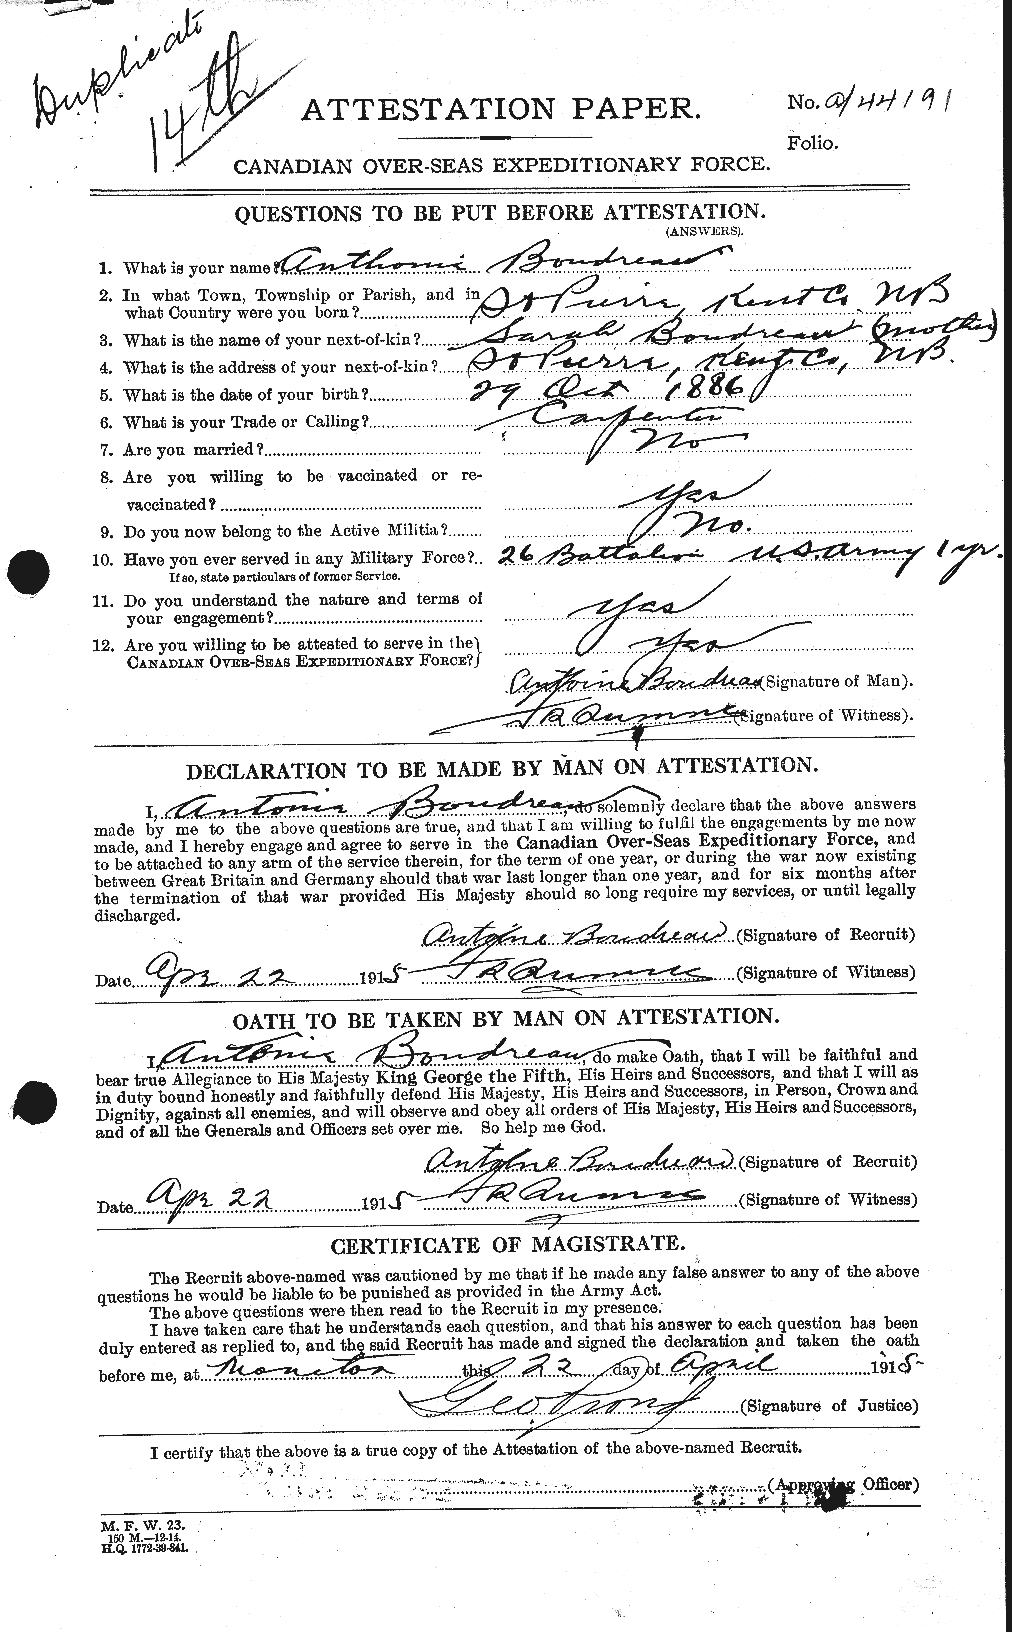 Personnel Records of the First World War - CEF 255670a